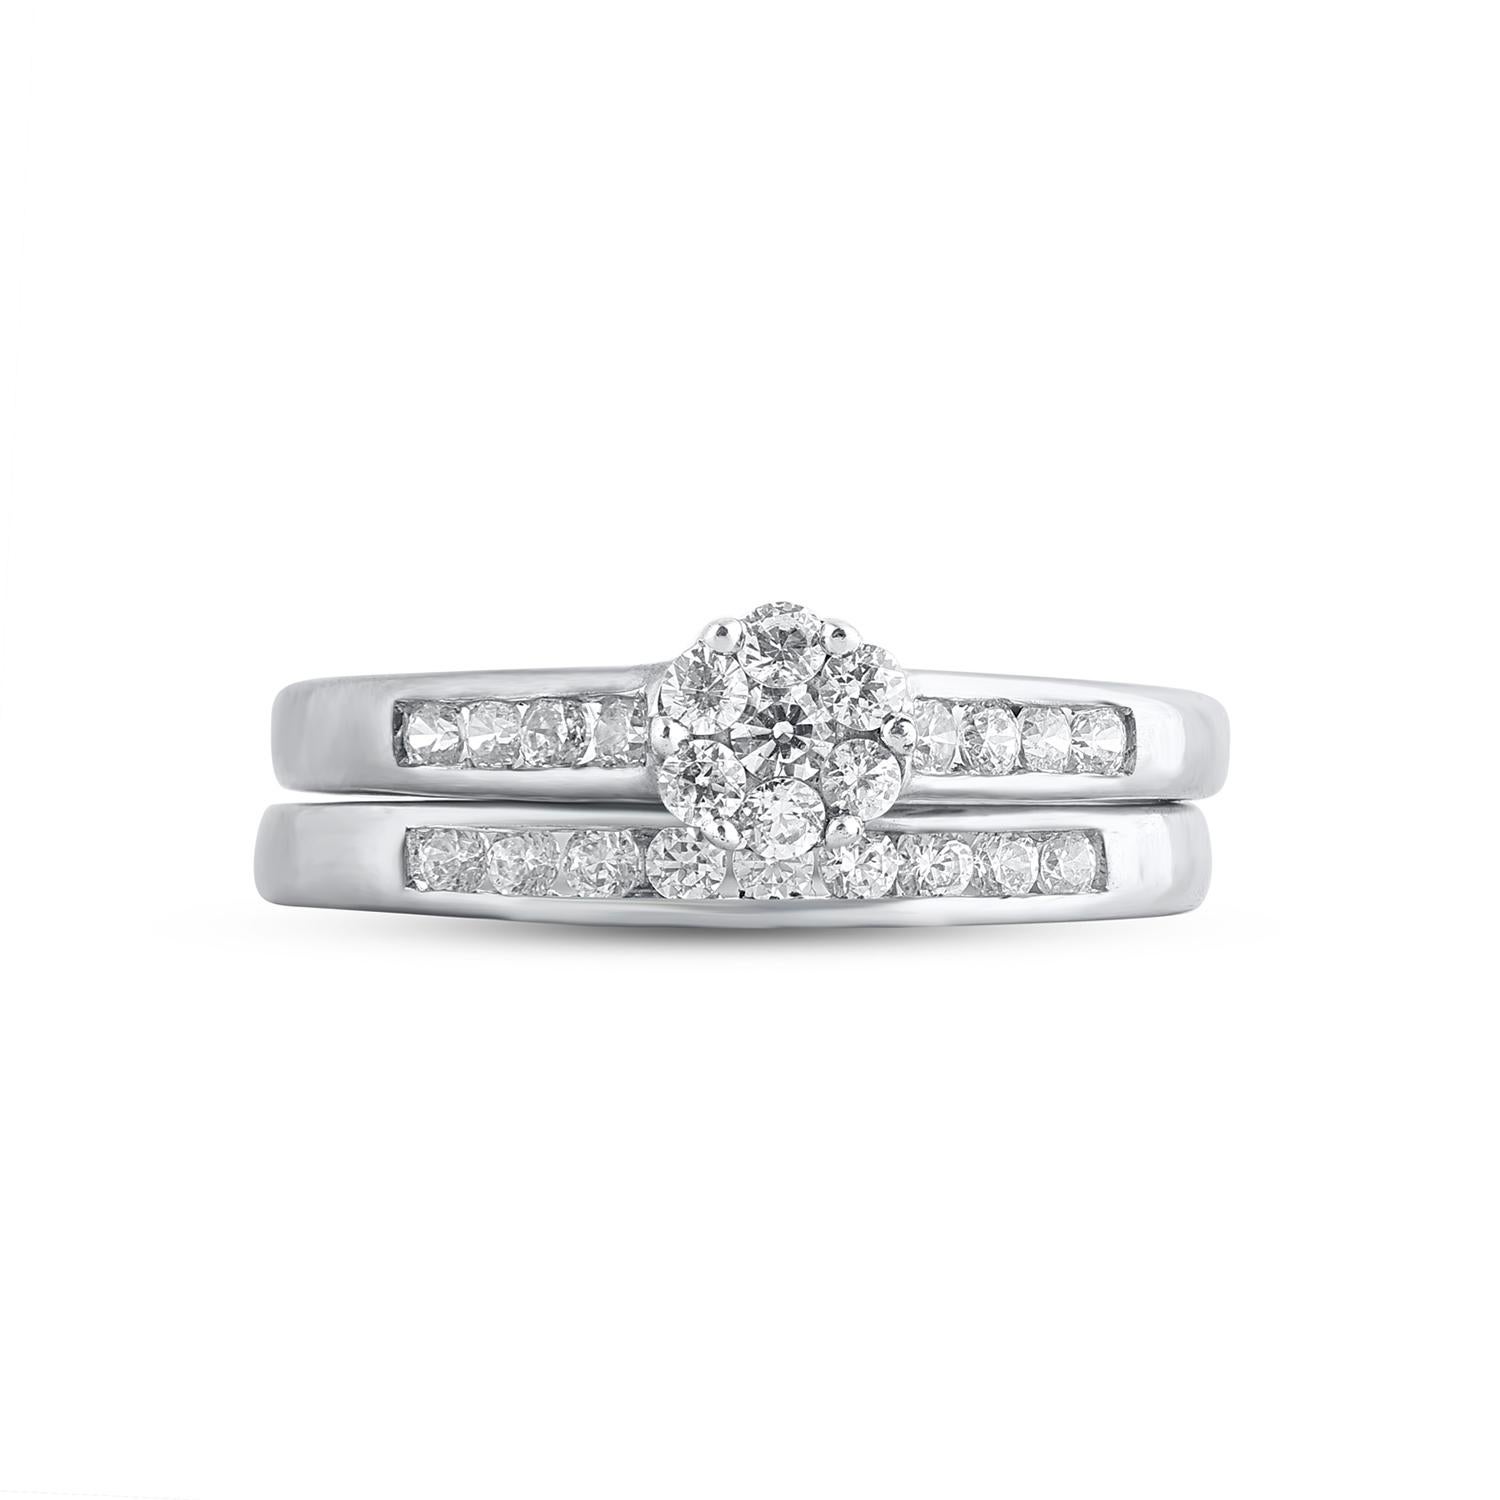 Express your love with this classic and dazzling diamond bridal set. Crafted in 14 Karat white gold. This wedding ring features a sparkling 24 brilliant cut diamonds beautifully set in pressure & channel setting. The total diamond weight is 0.50